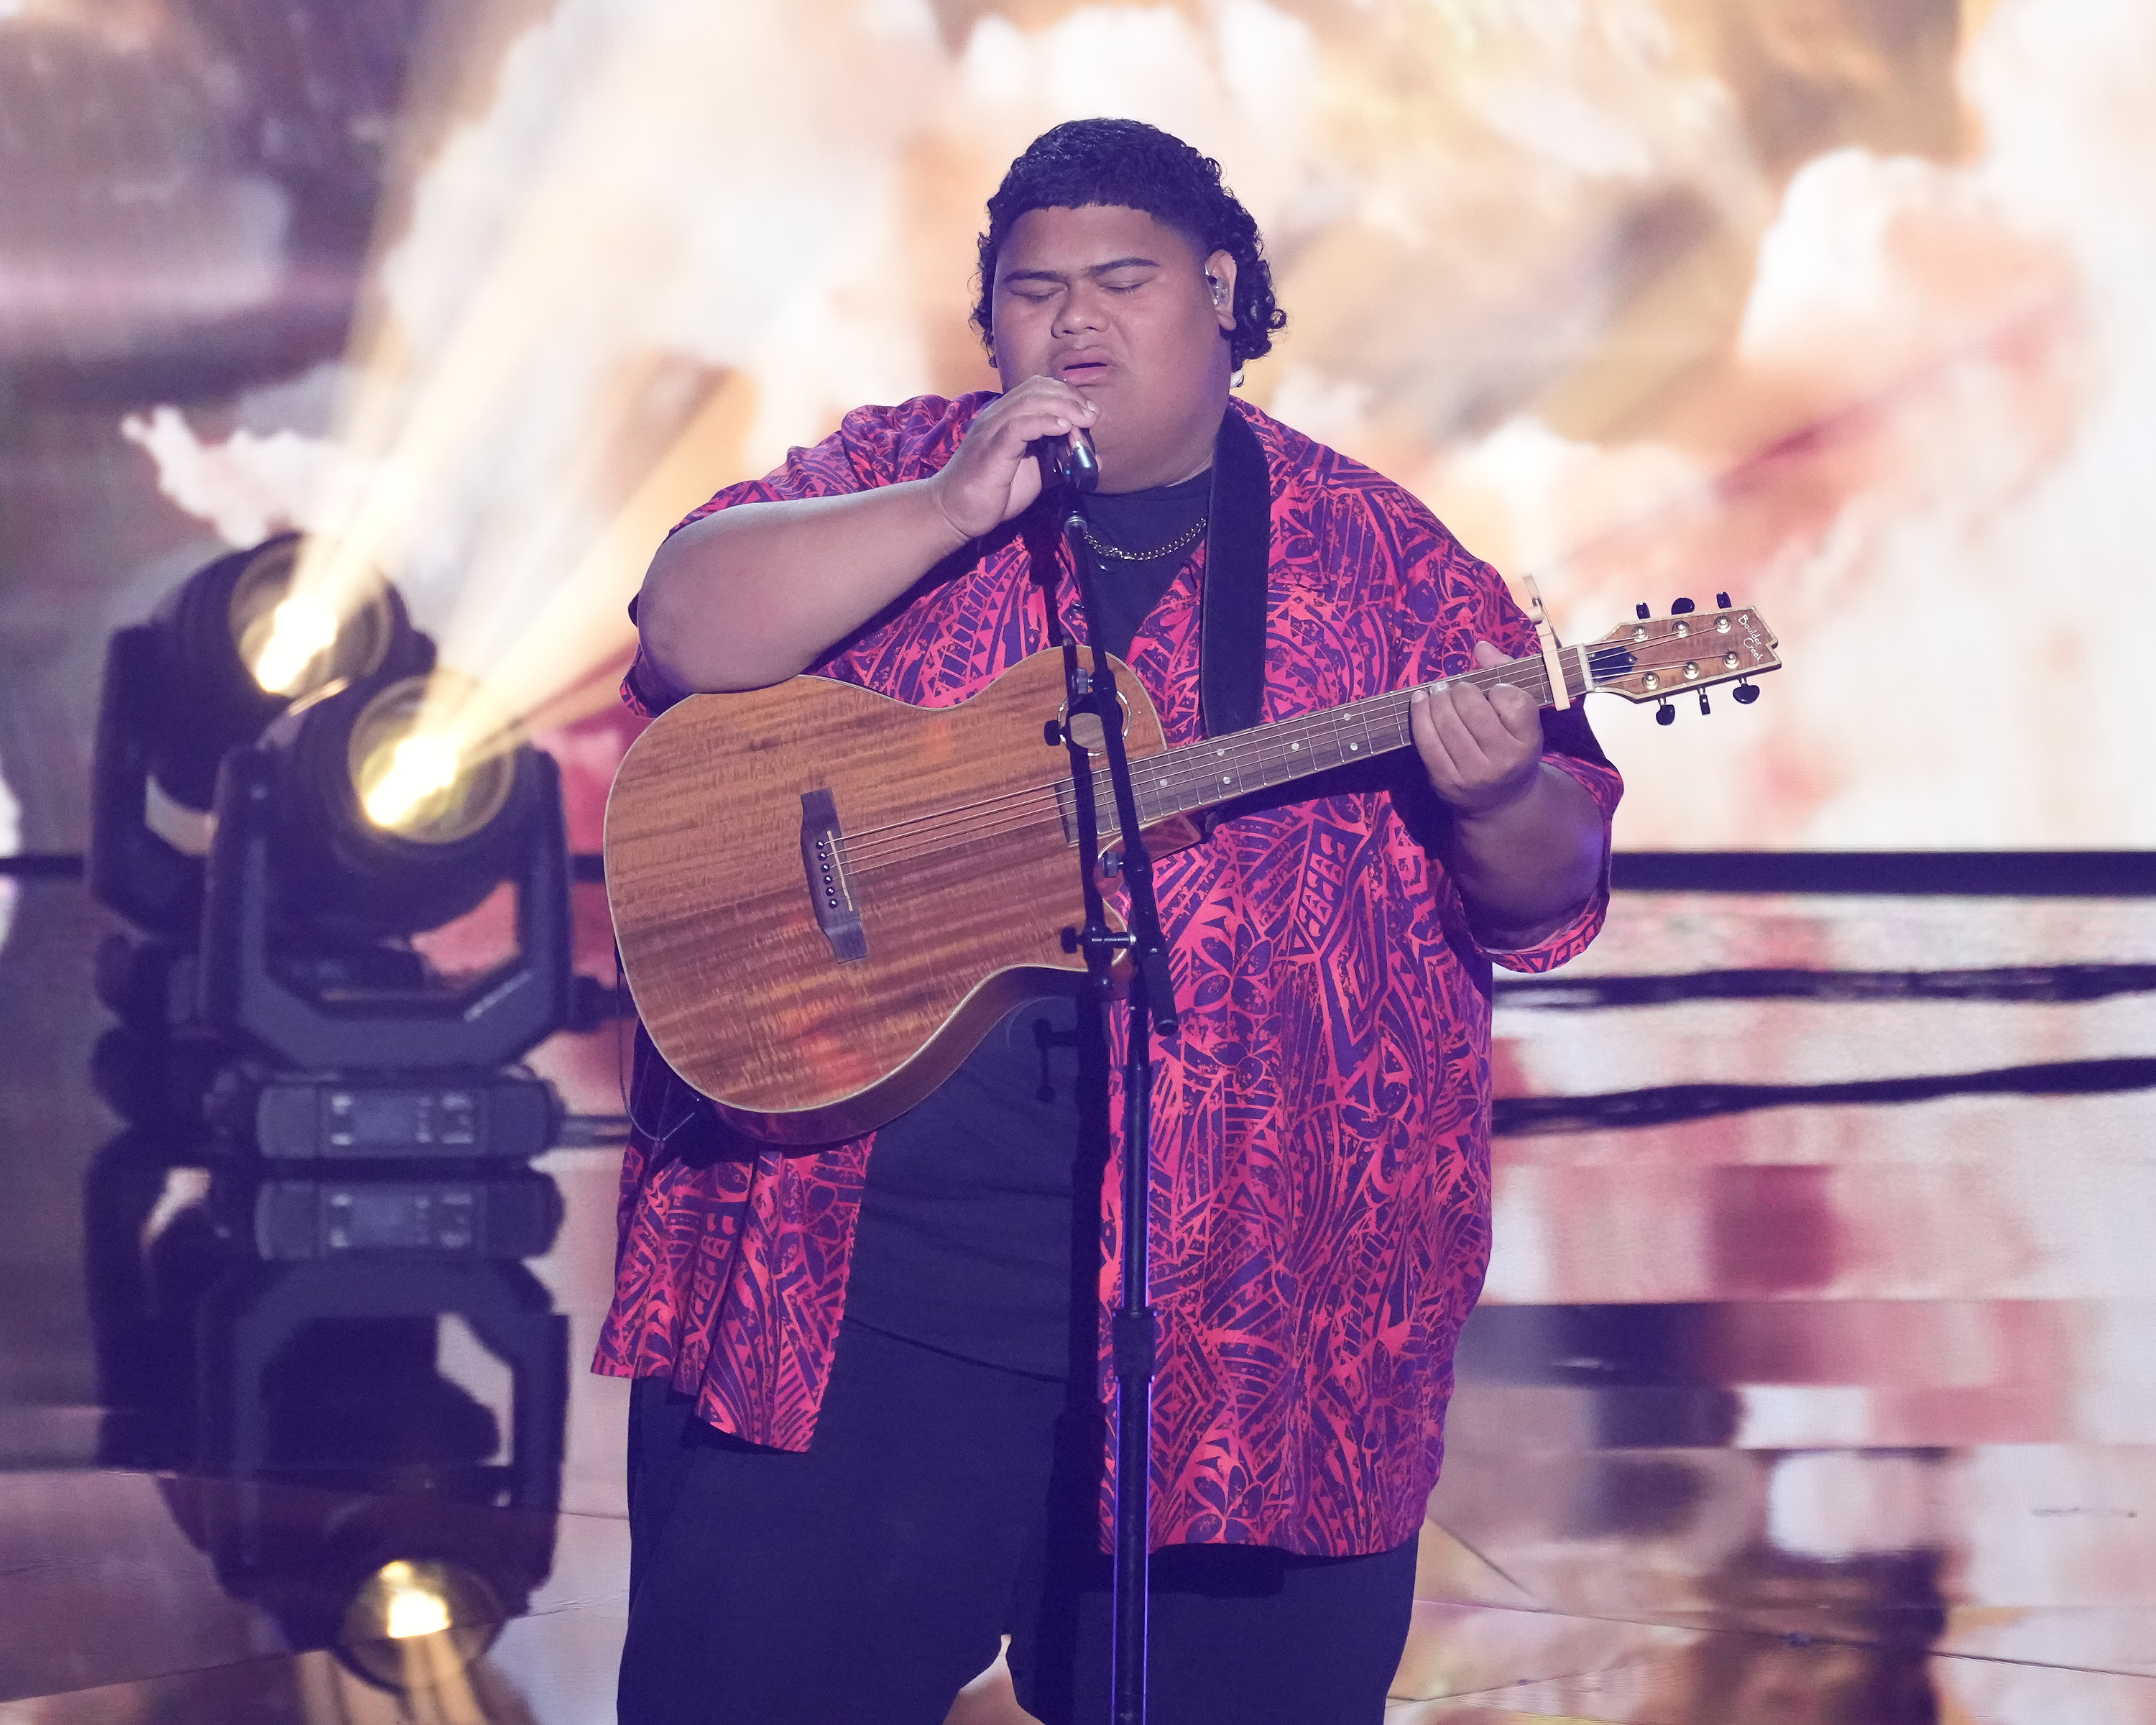 Iam Tongi performing during the season finale of "American Idol" on May 21, 2023. | Source: Getty Images